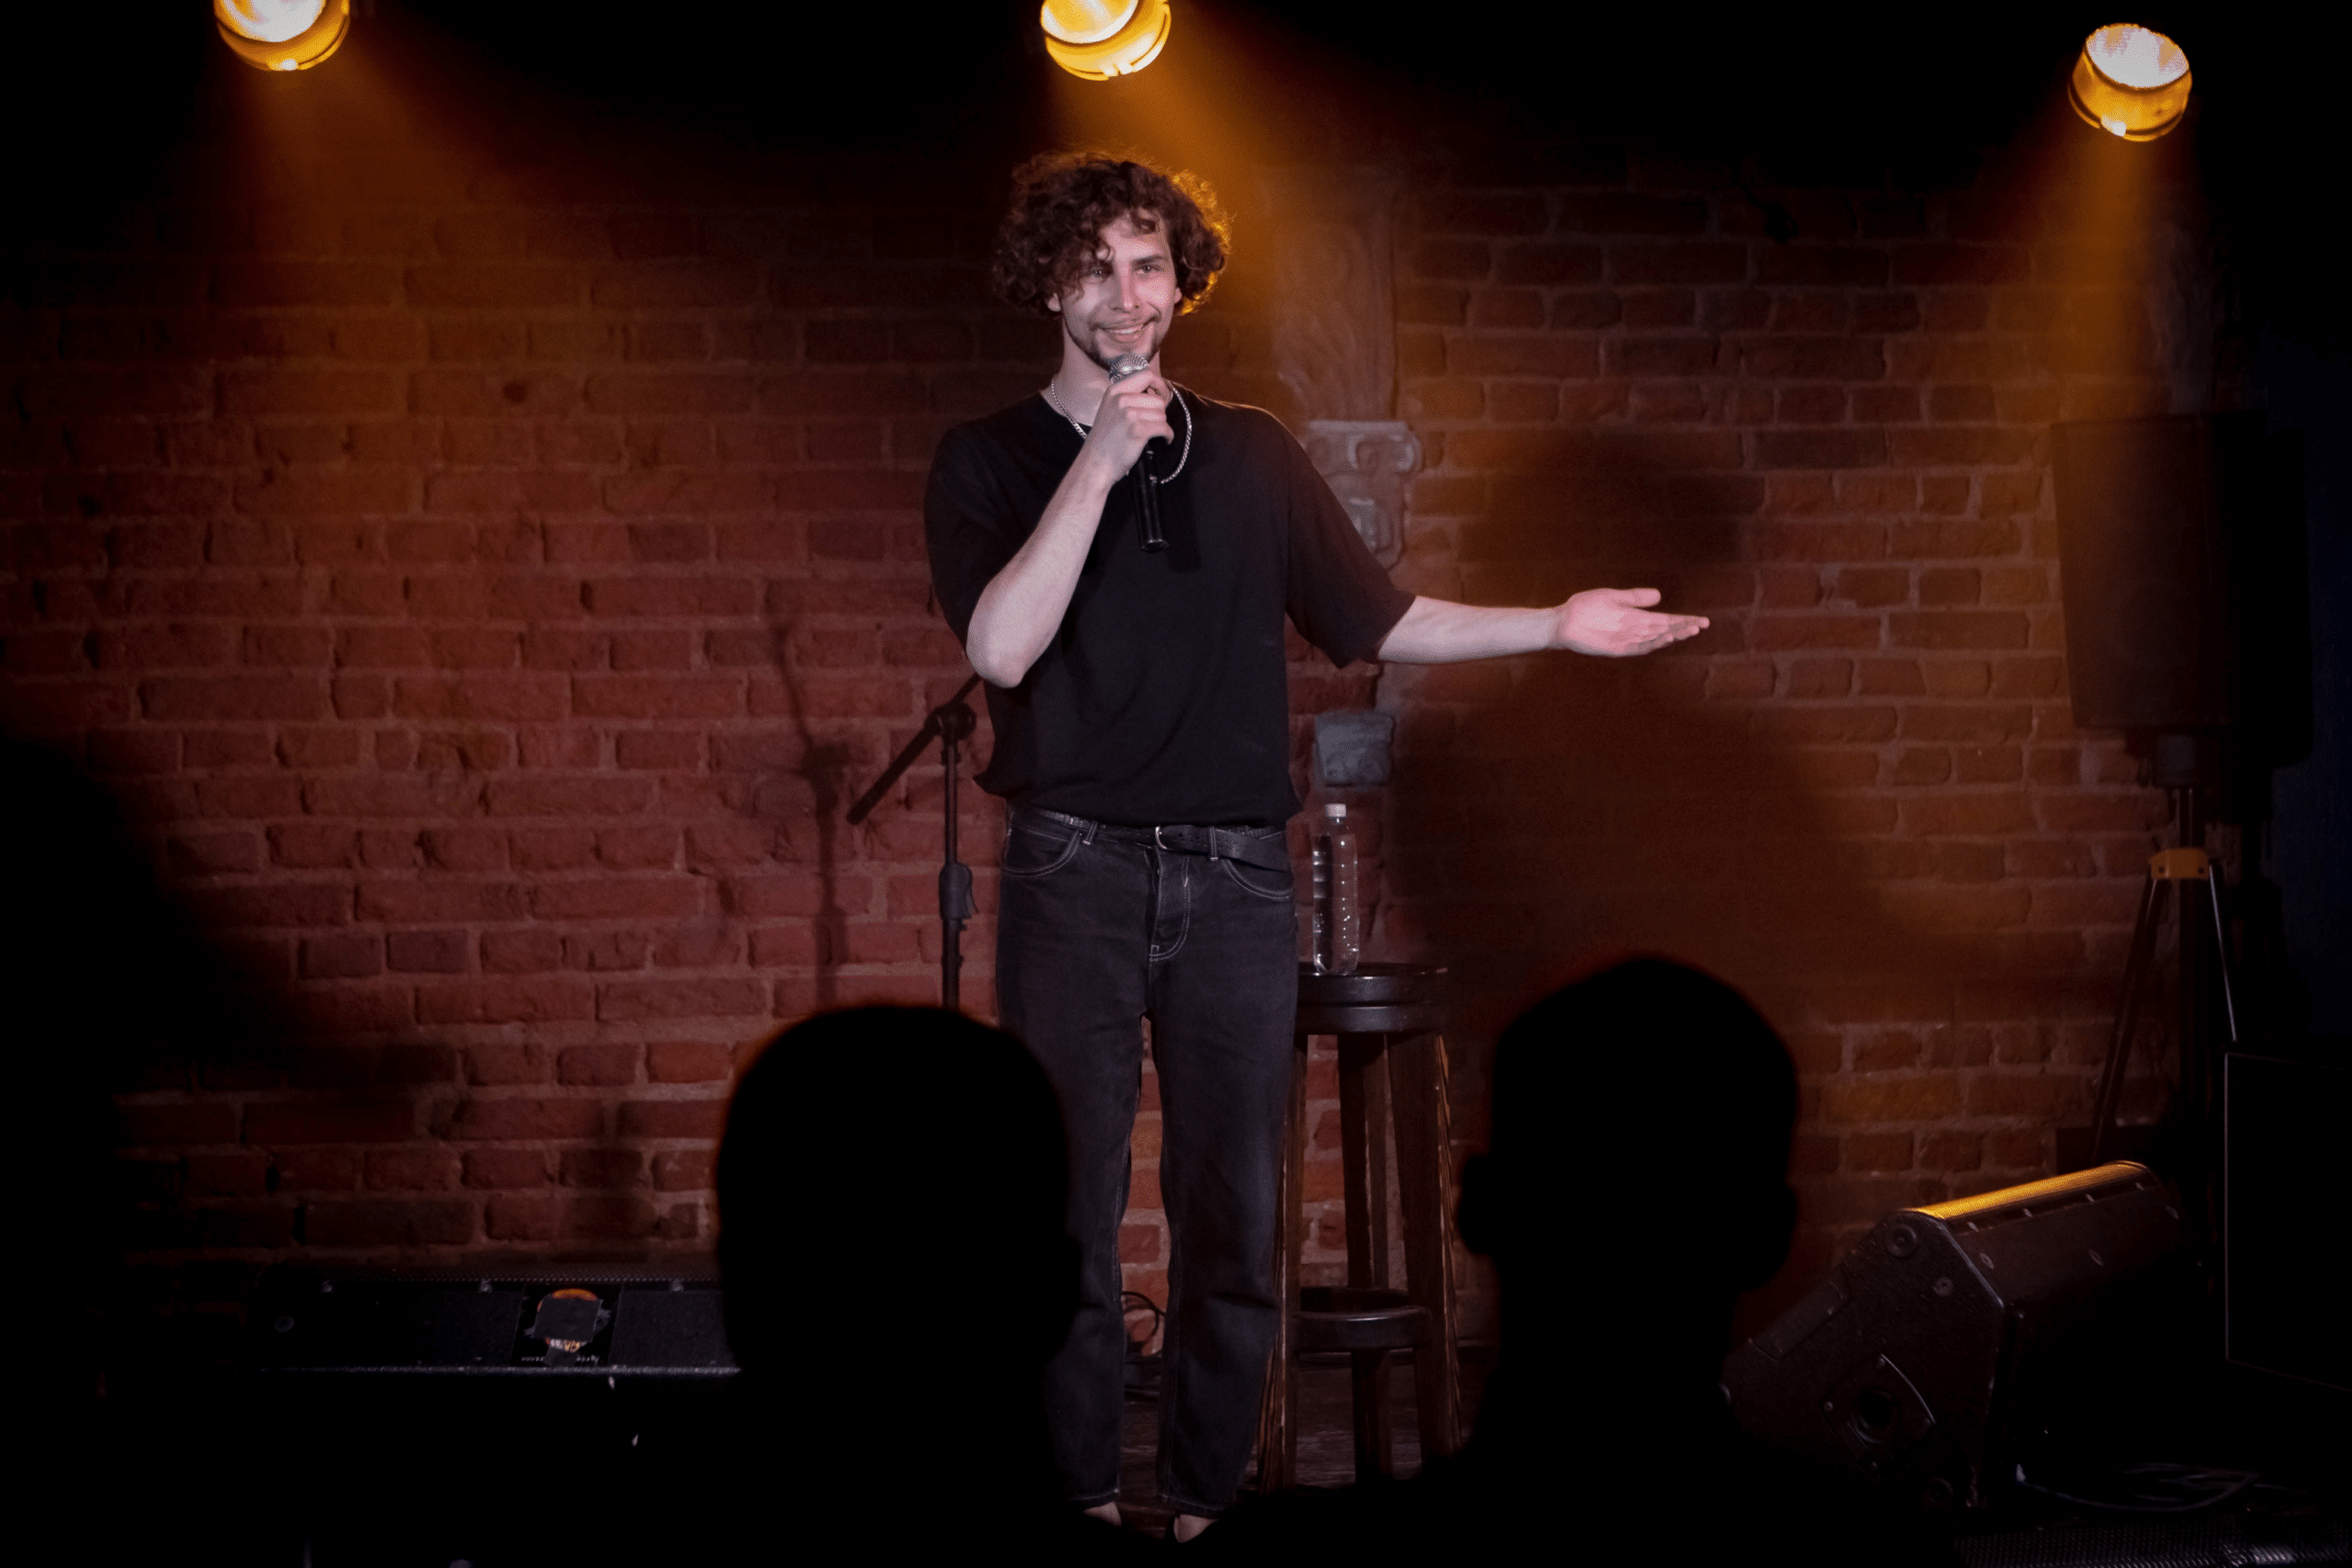 College student on a stage for an open mic comedy night